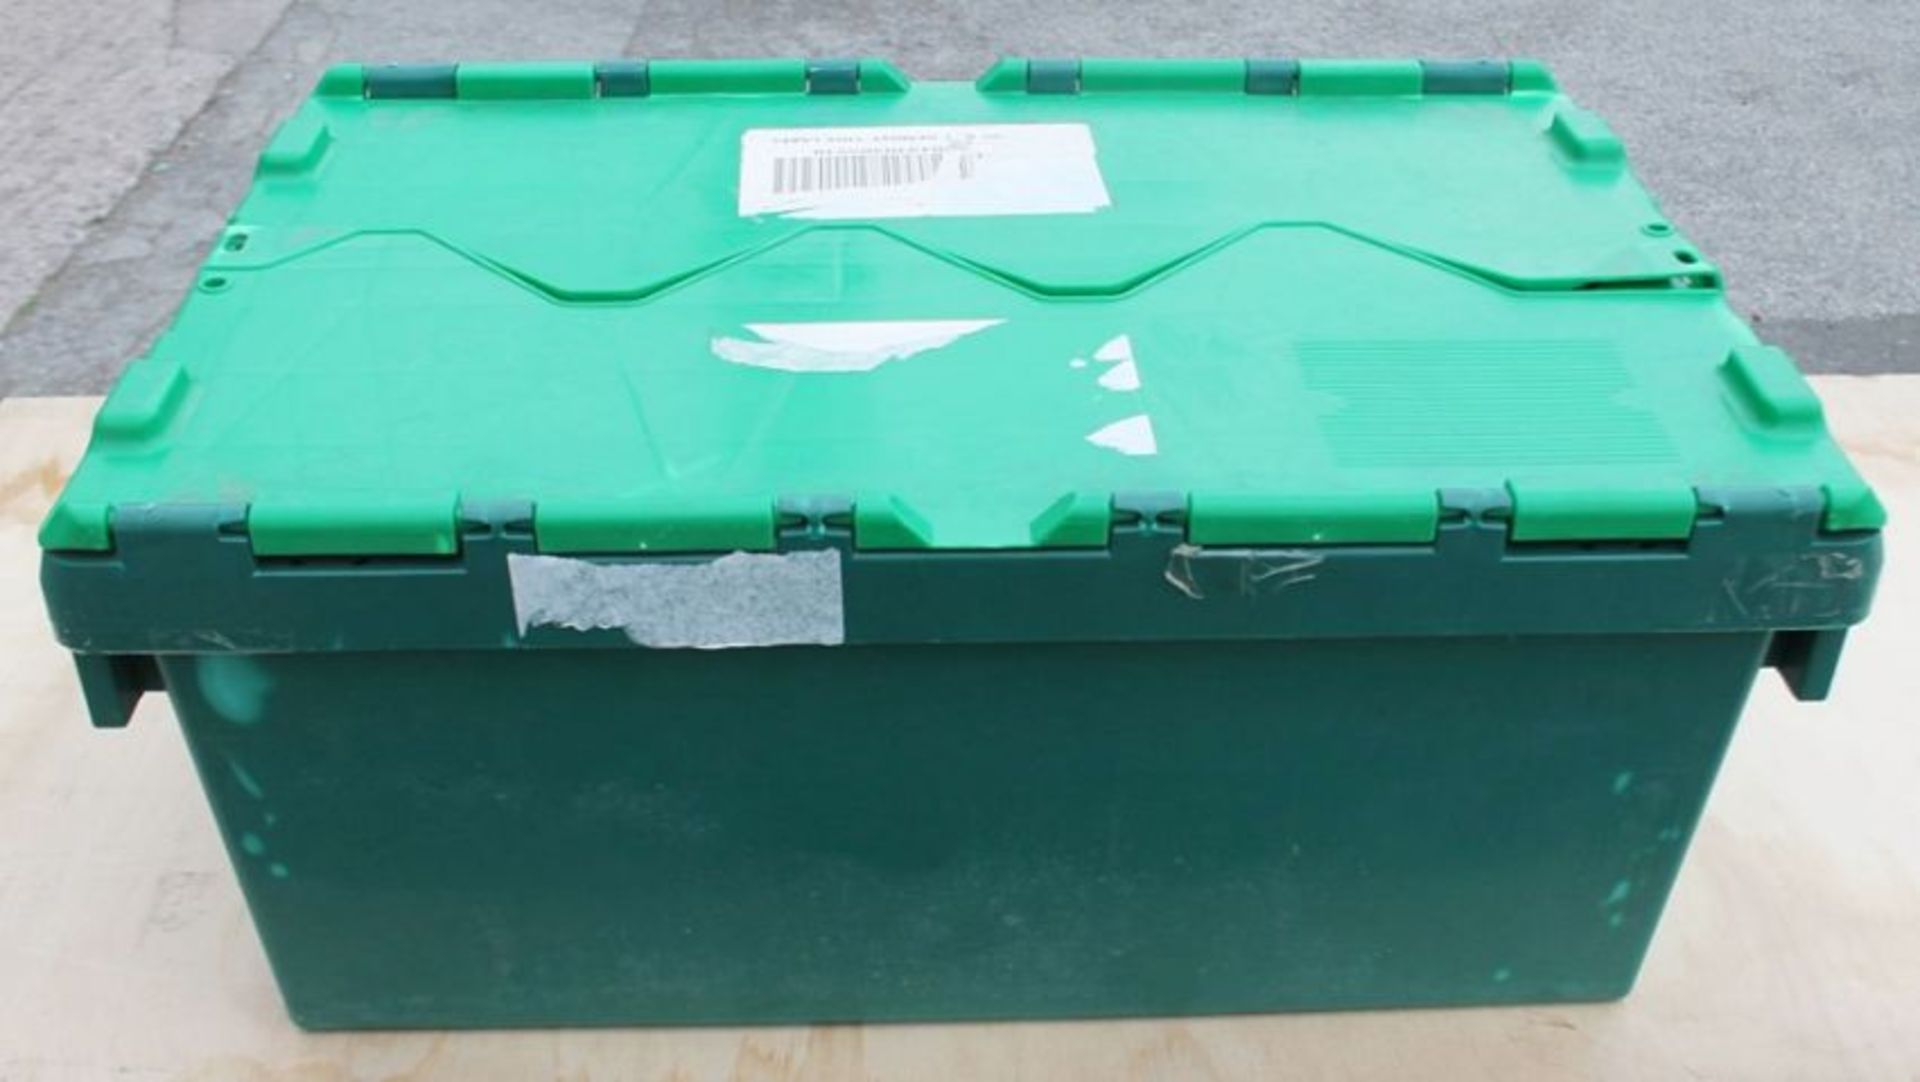 20 x Robust Low Profile Green Plastic Secure Storage Boxes With Attached Hinged Lids - Dimensions: - Image 7 of 7